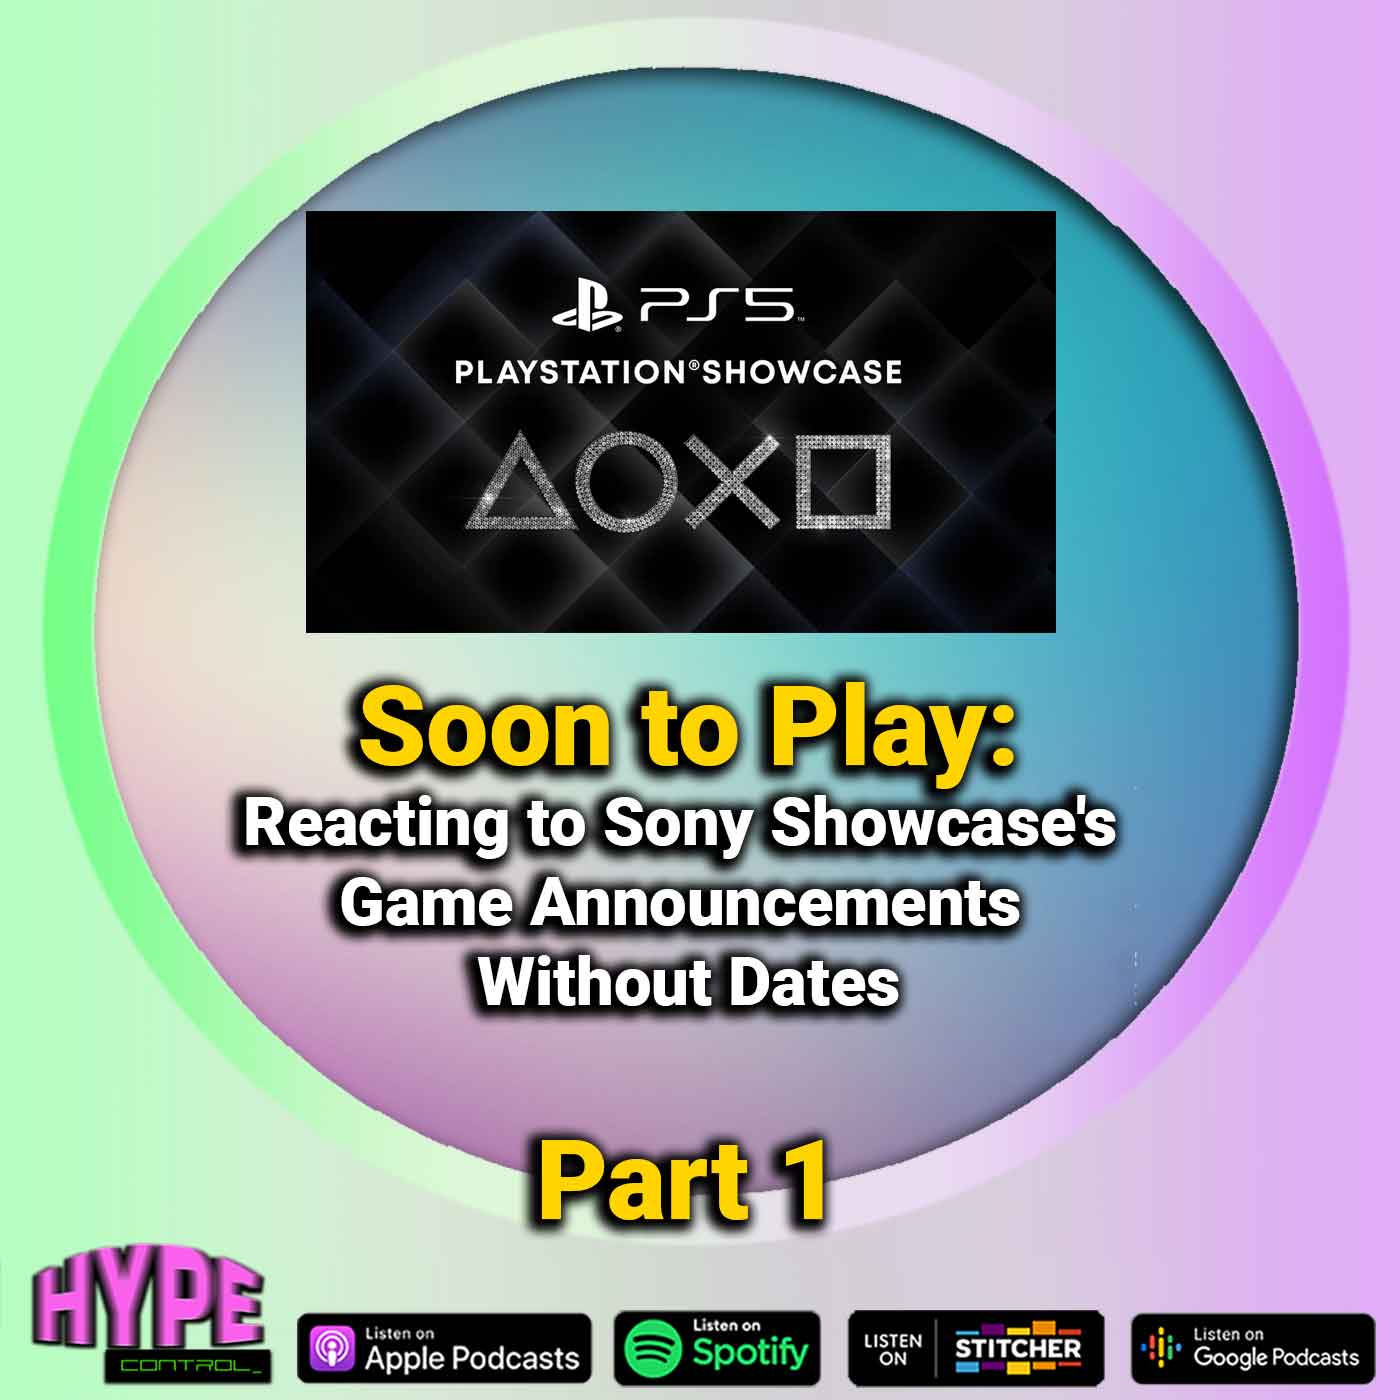 Ep. 32 Part 1 - Soon To Play (Reacting to Sony Showcase's Game Announcements Without Dates)